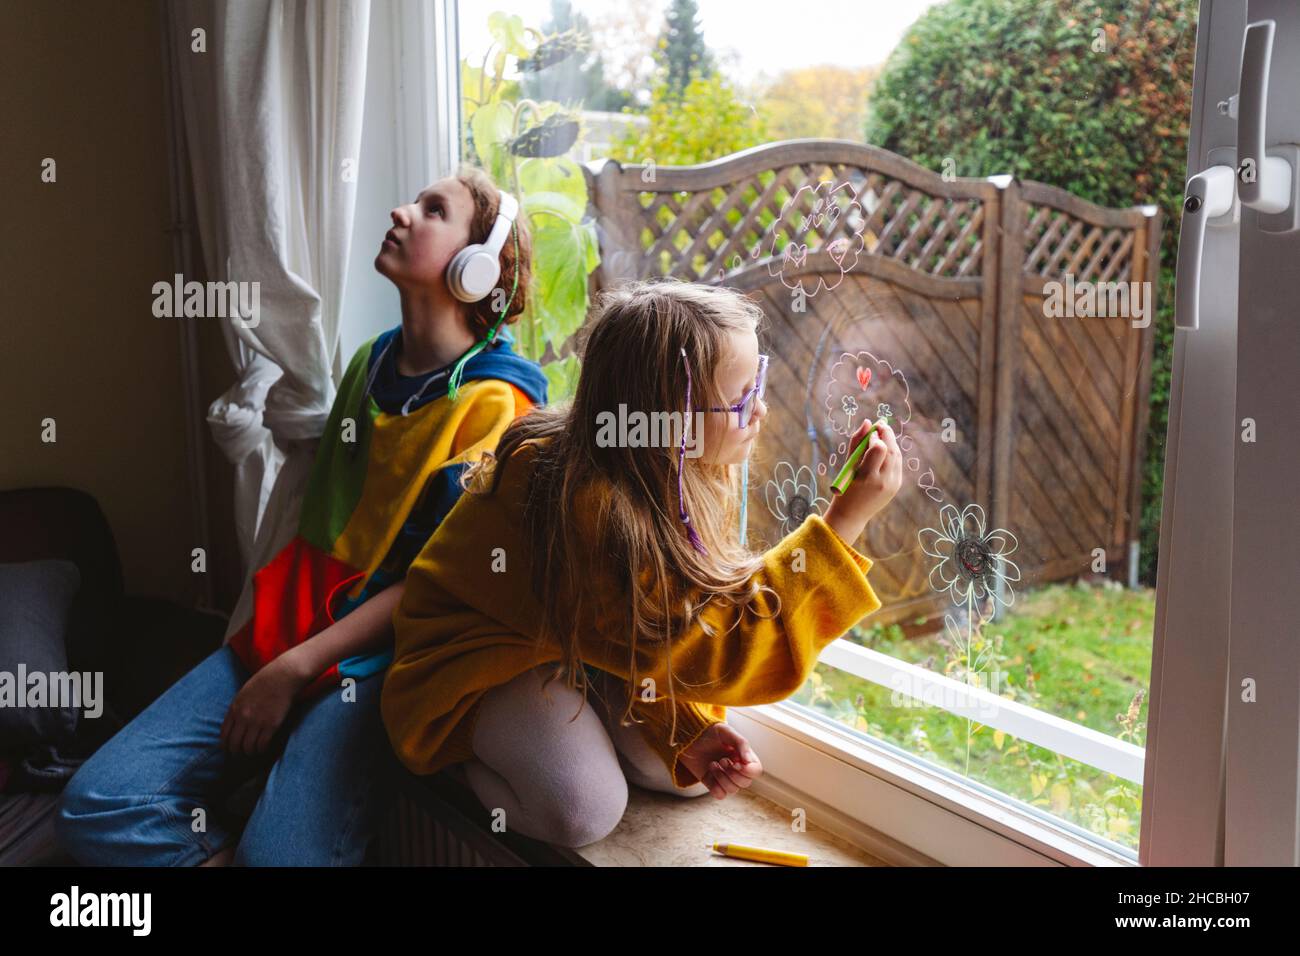 Smiling grandmother standing by granddaughter drawing heart shape on window Stock Photo